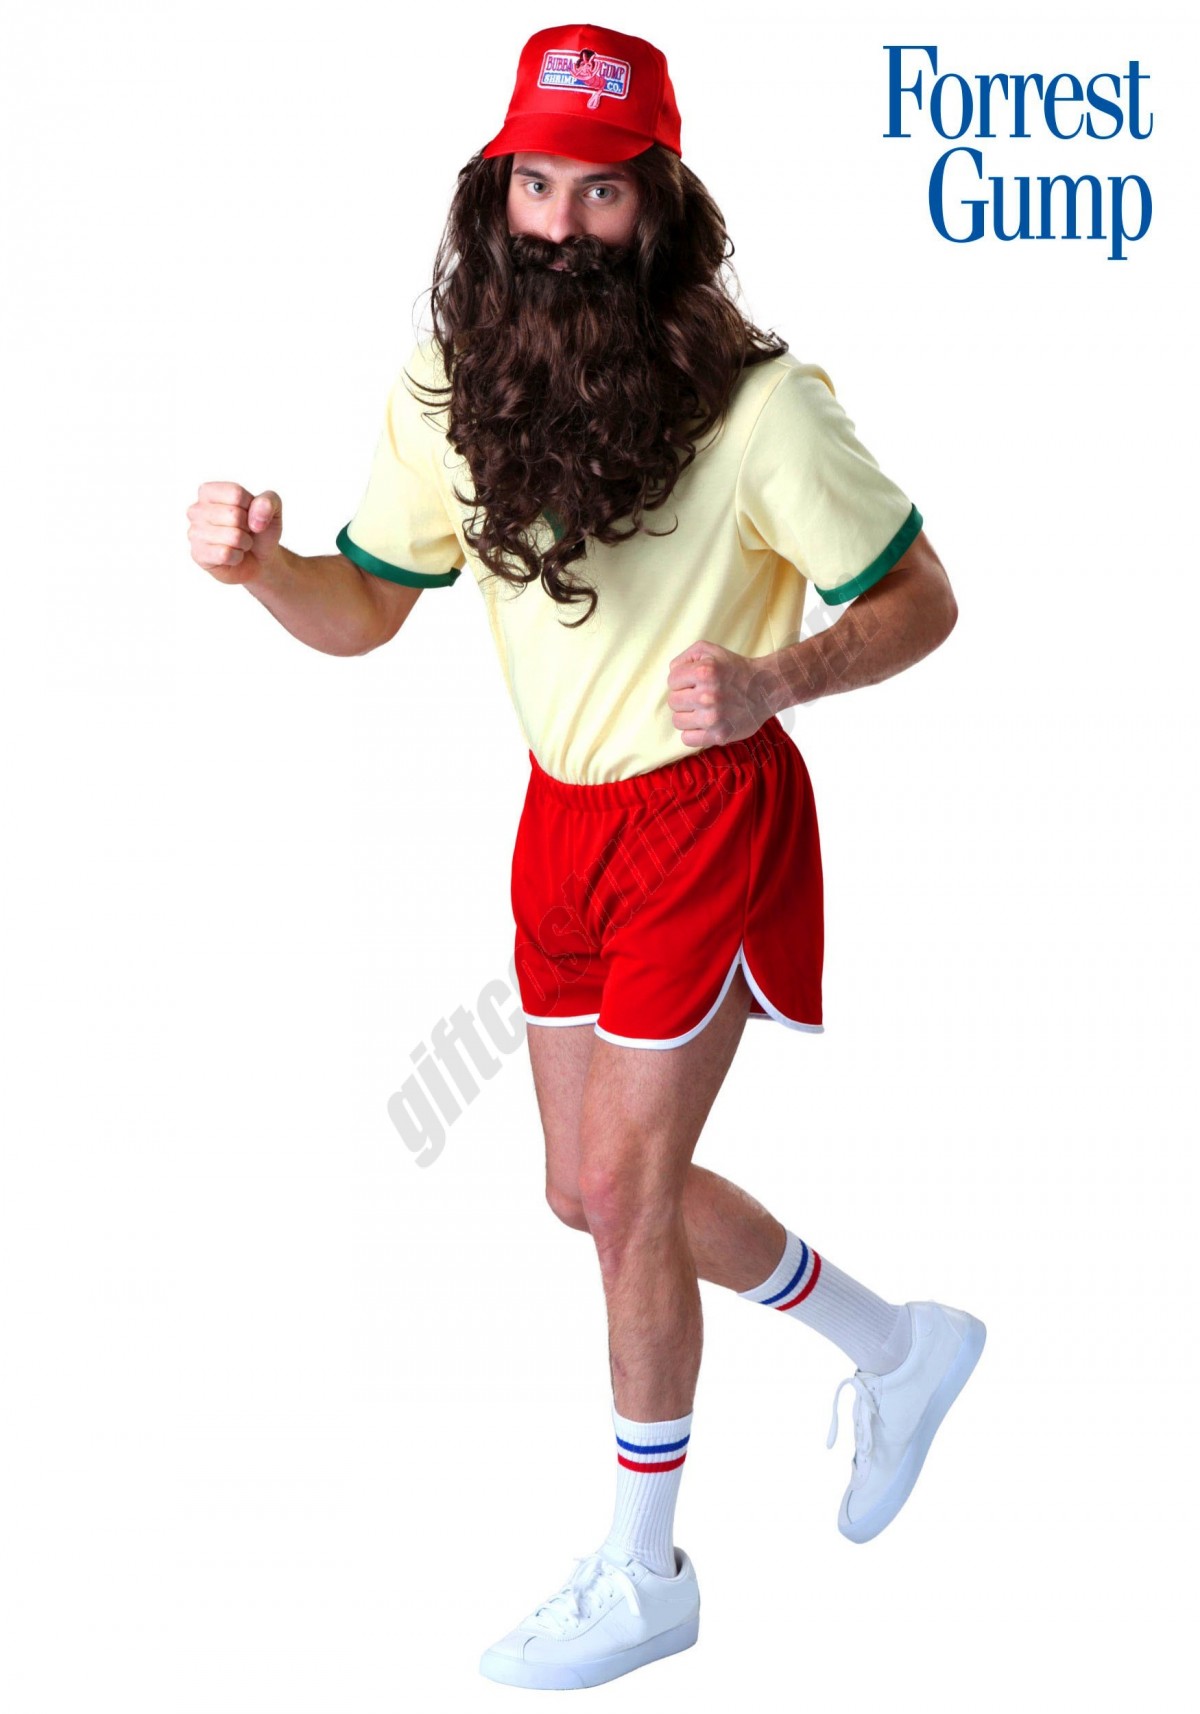 Forrest Gump Costume Running  Promotions - -0